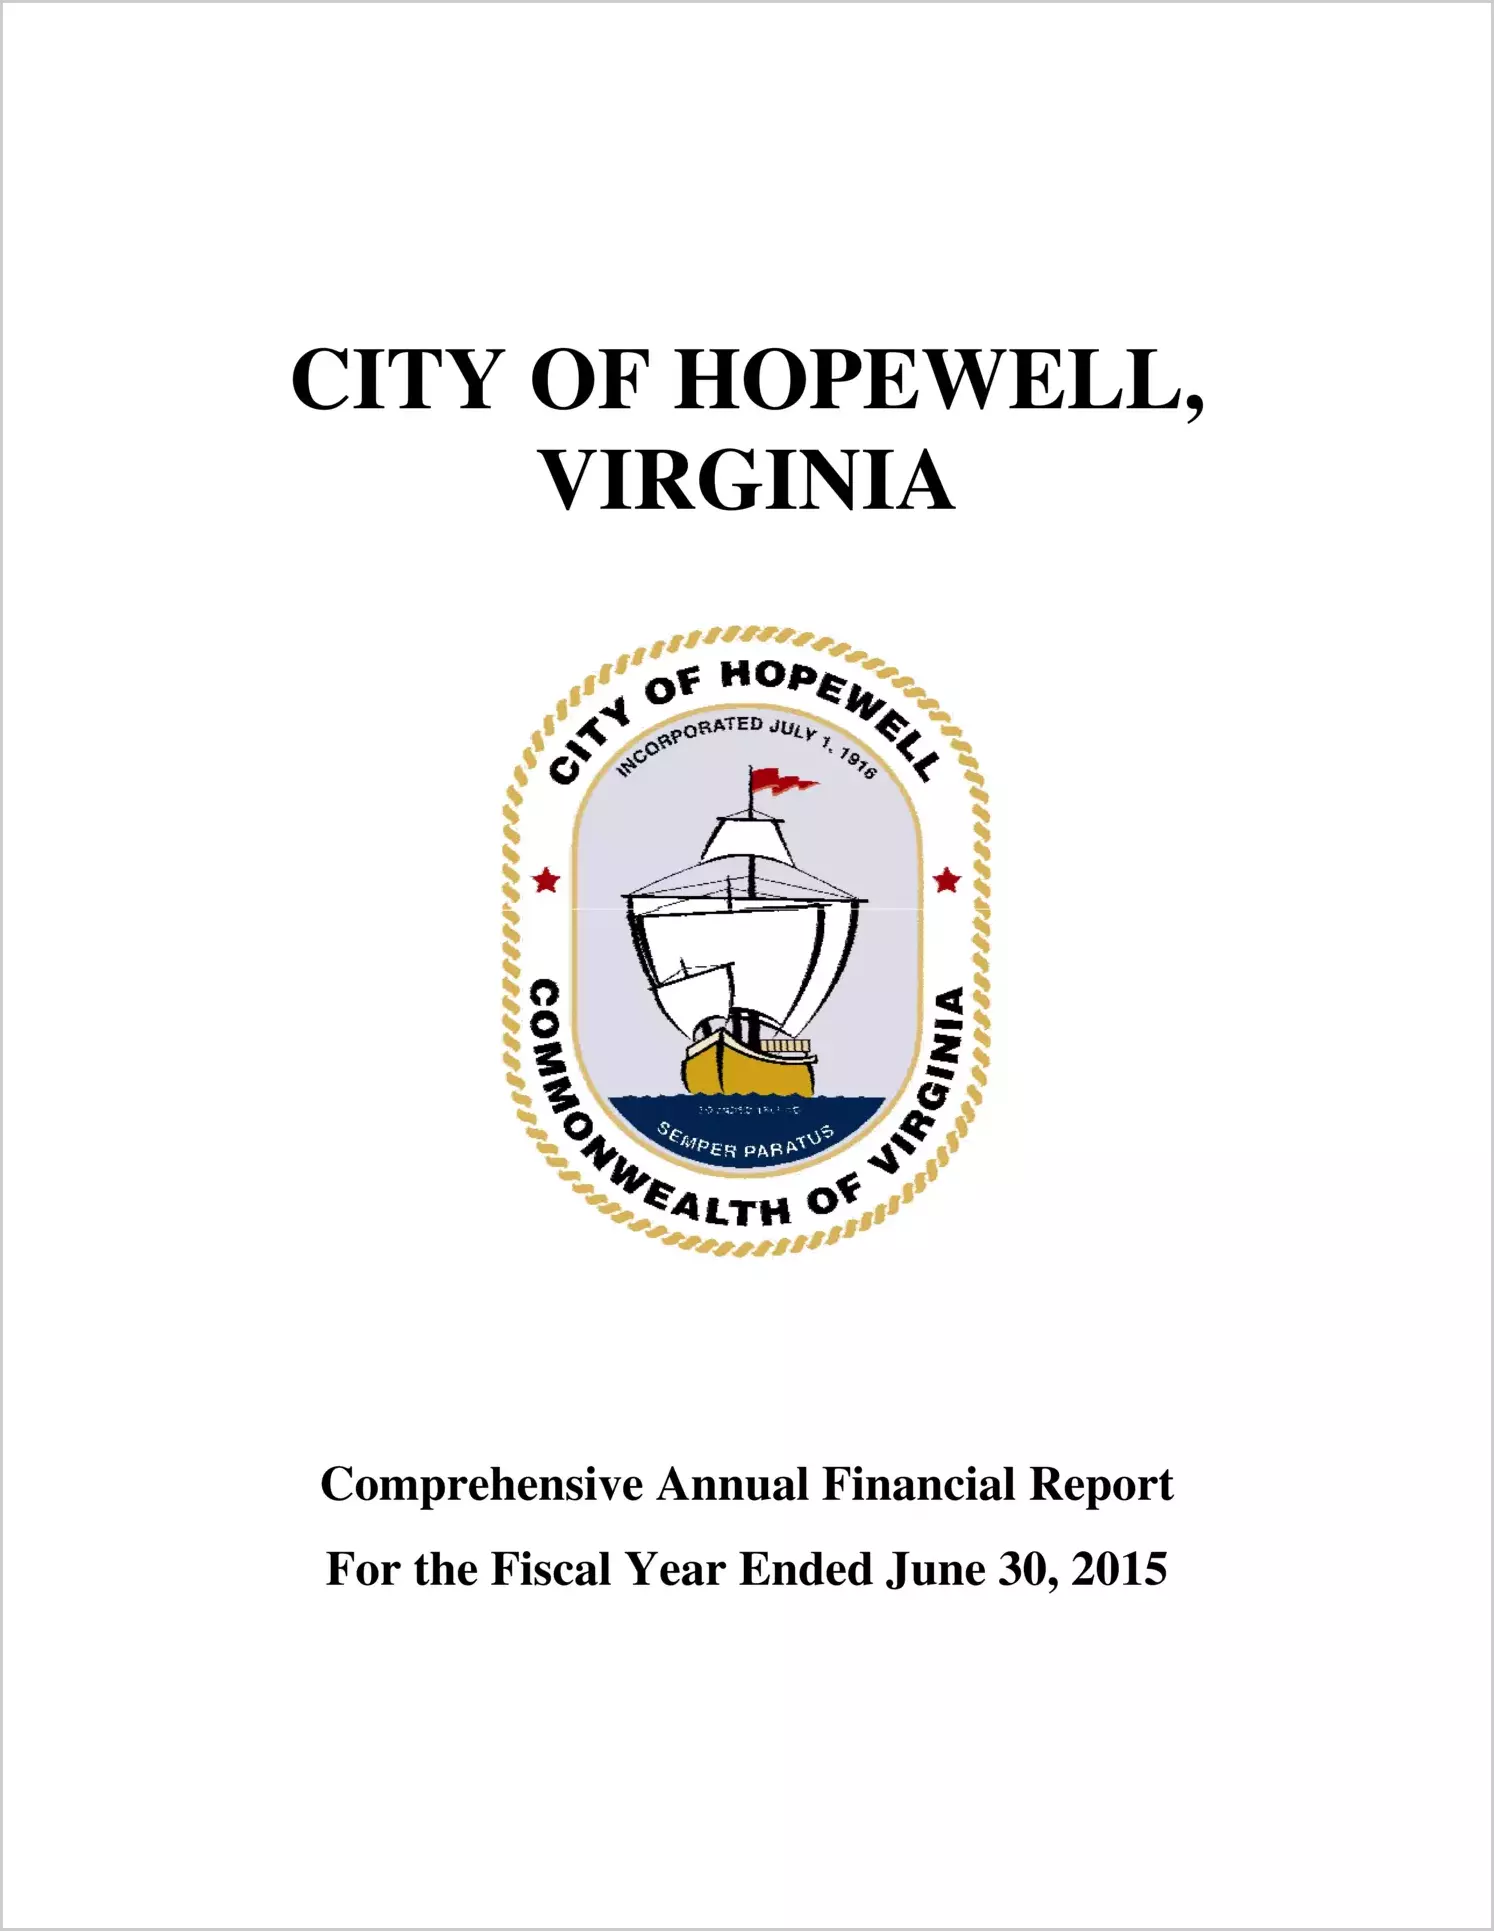 2015 Annual Financial Report for City of Hopewell